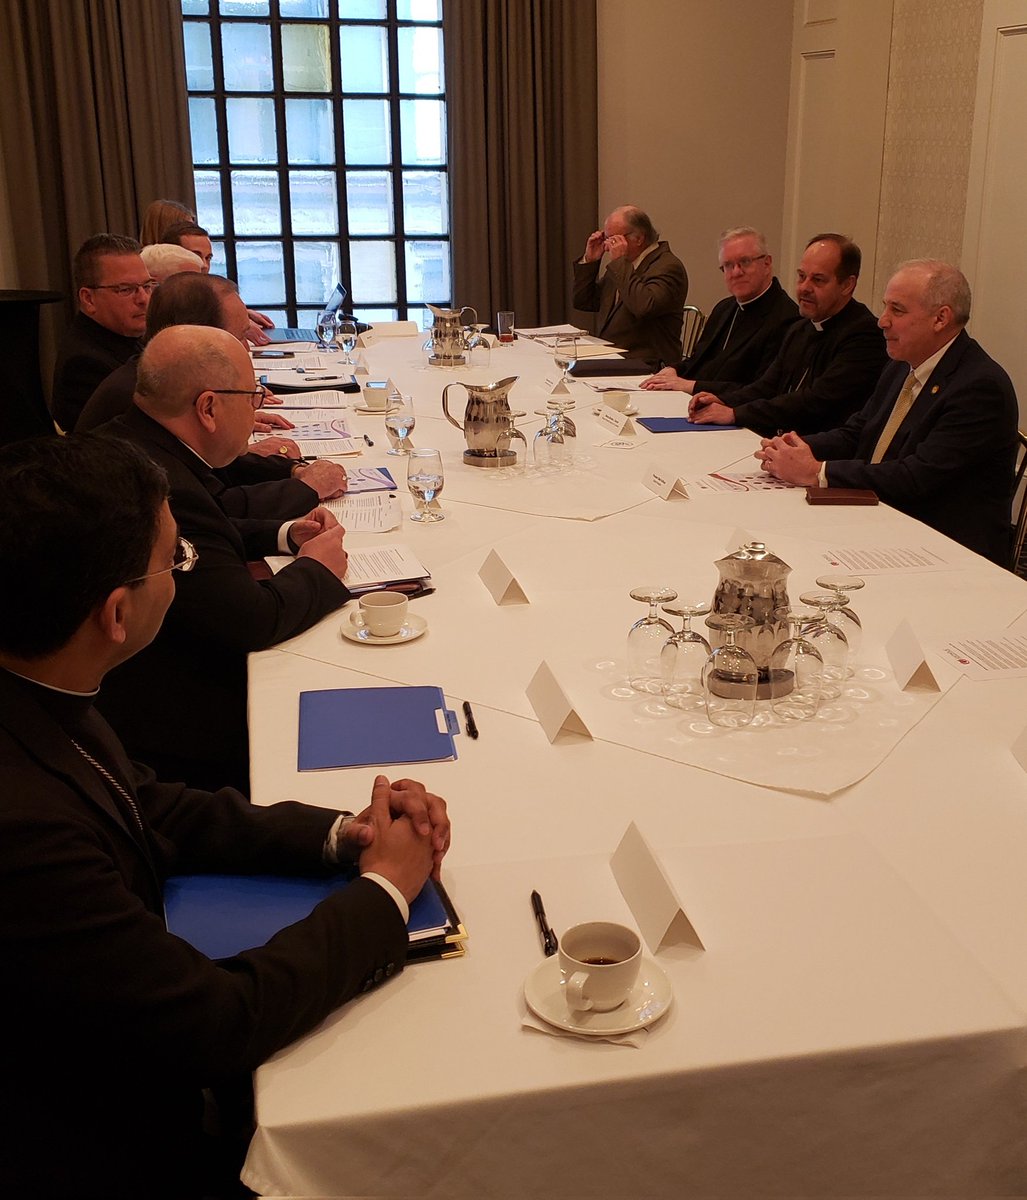 Supporting parents making the best decisions for their kids. @OhioSenateGOP President @matthuffman1 meets Bishops from @ohiocatholics to talk about their support for SB 11, expanding Ed Choice vouchers to every family and standing for lives of families, children and babies.